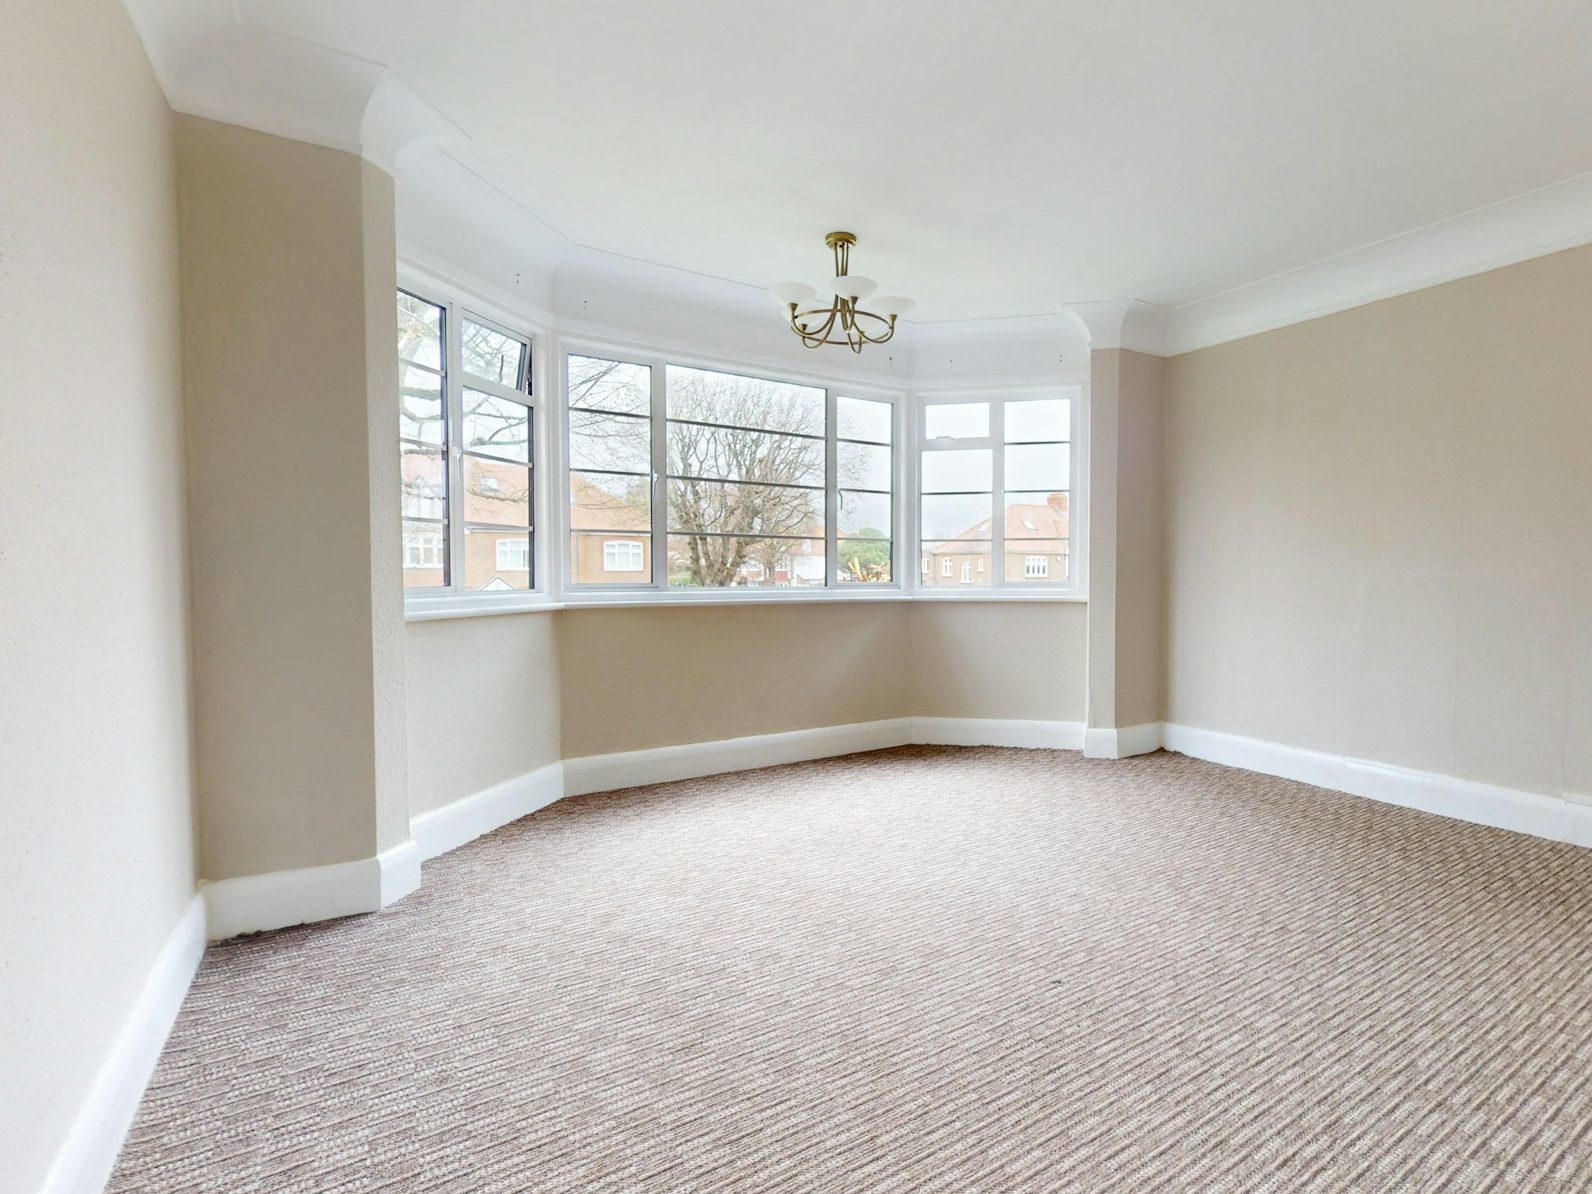 Flat to rent on New Church Road Hove, BN3